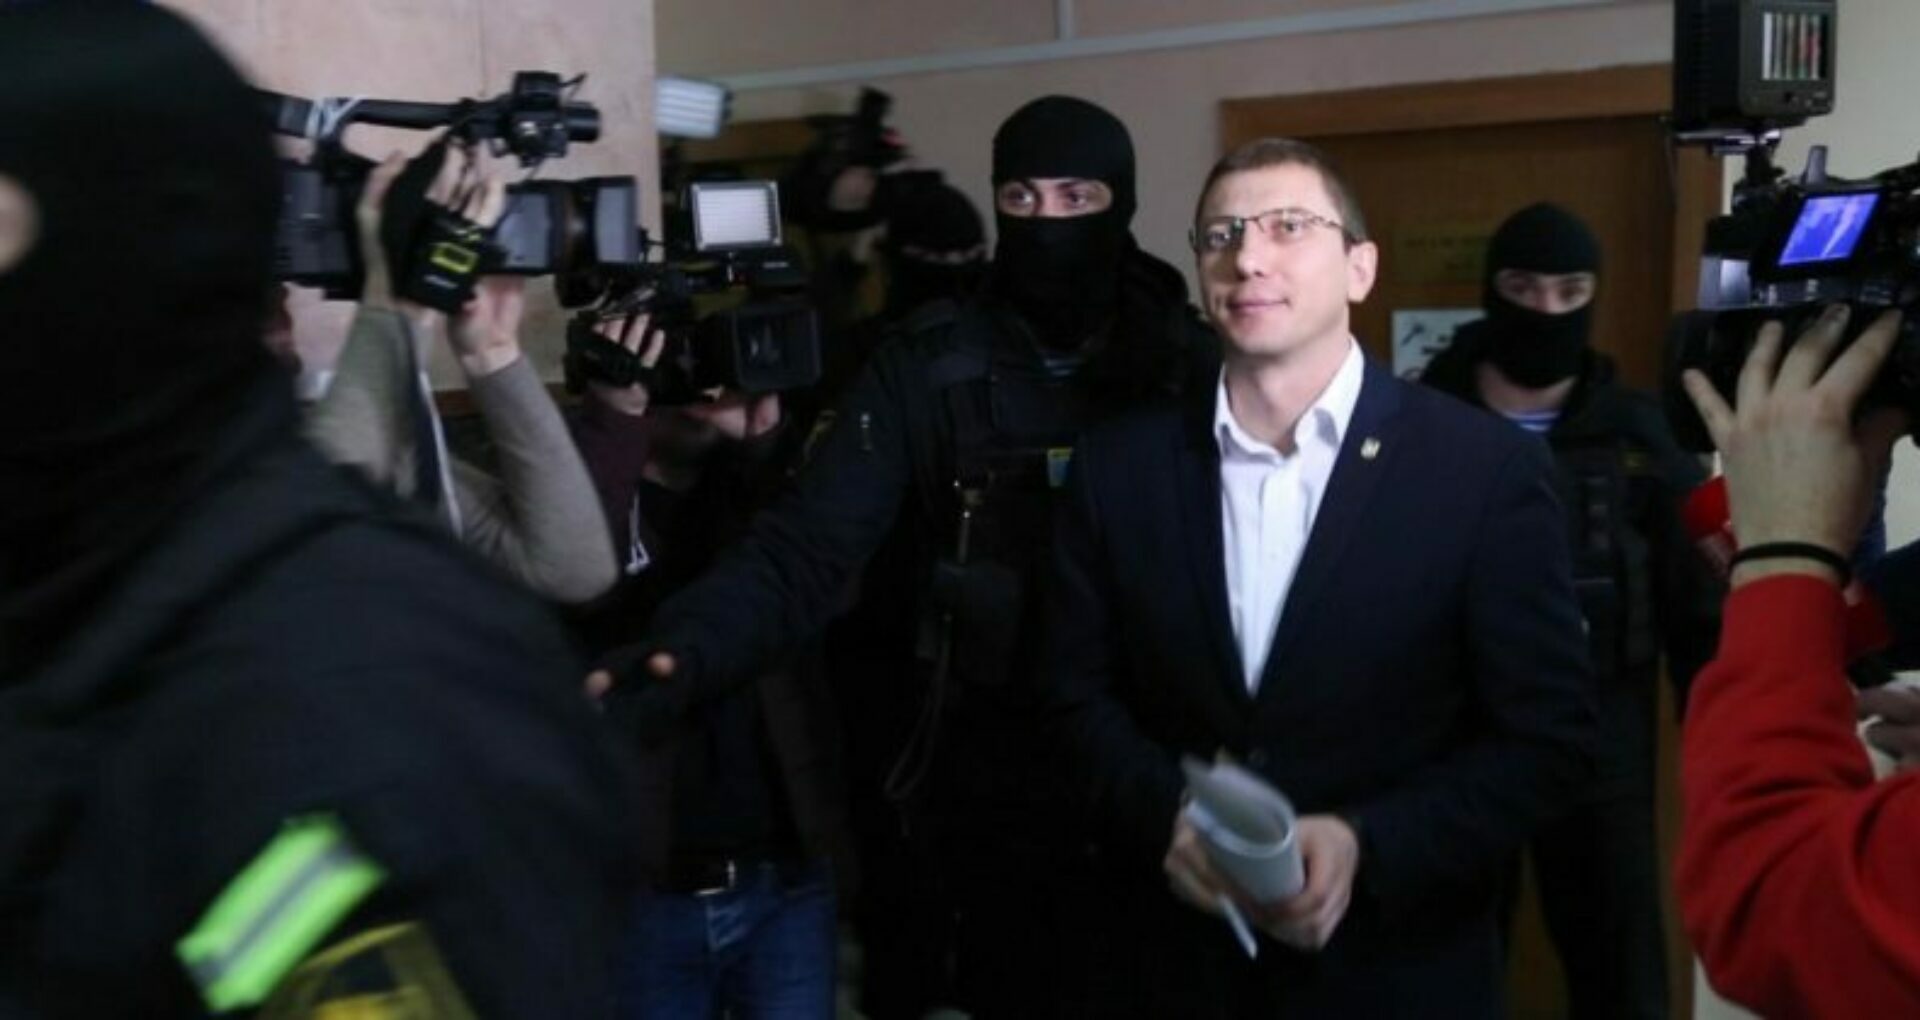 The Suspended Head of the Anticorruption Prosecutor’s Office, Viorel Morari, Was Detained